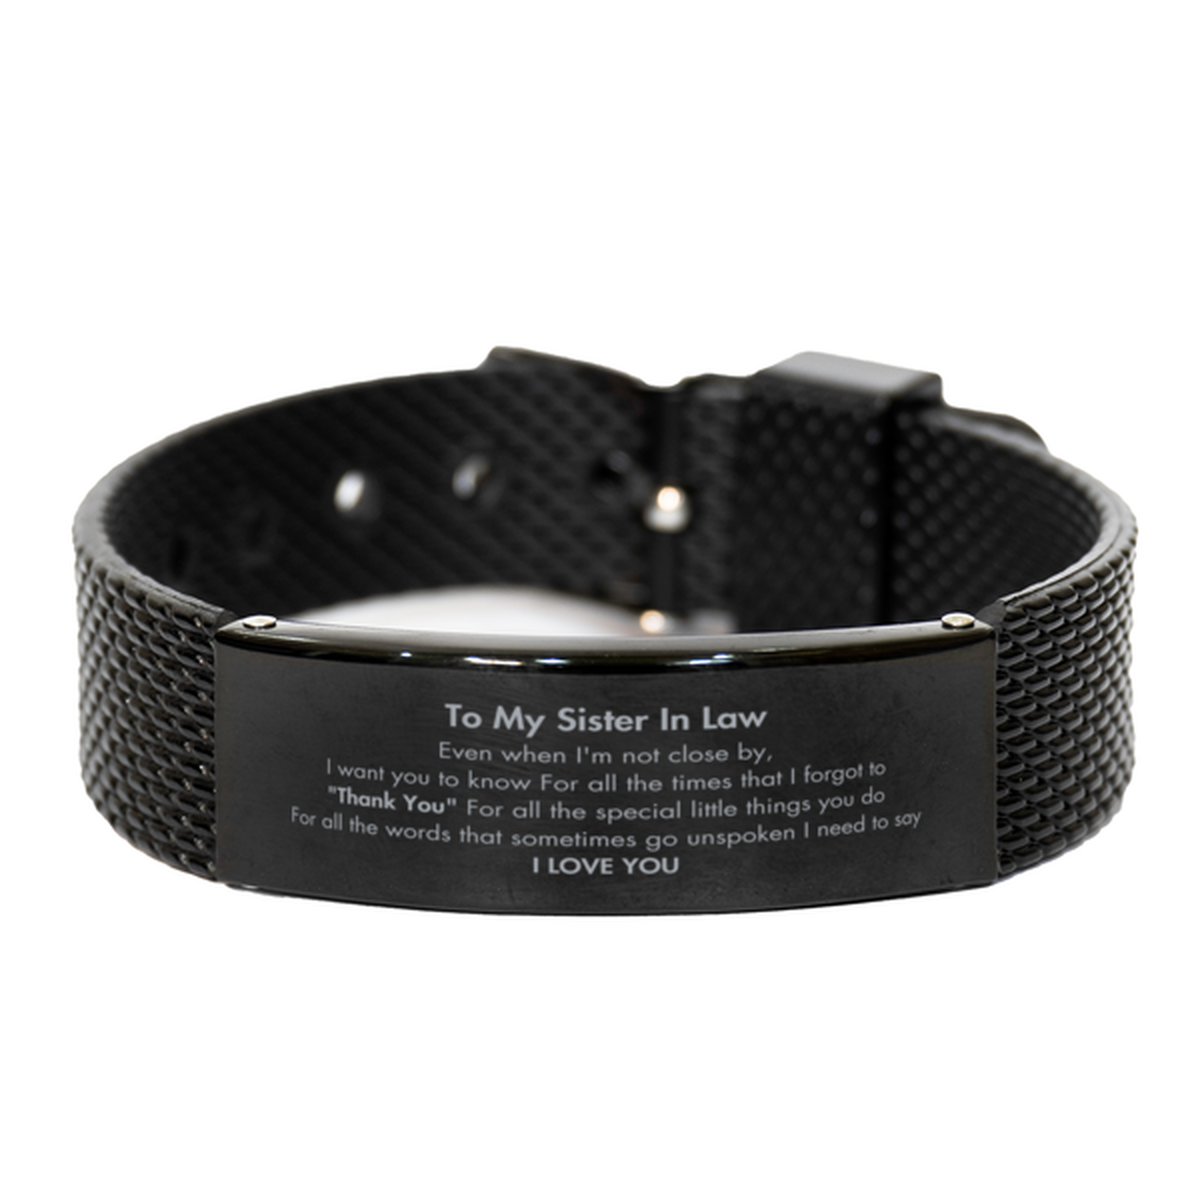 Thank You Gifts for Sister In Law, Keepsake Black Shark Mesh Bracelet Gifts for Sister In Law Birthday Mother's day Father's Day Sister In Law For all the words That sometimes go unspoken I need to say I LOVE YOU